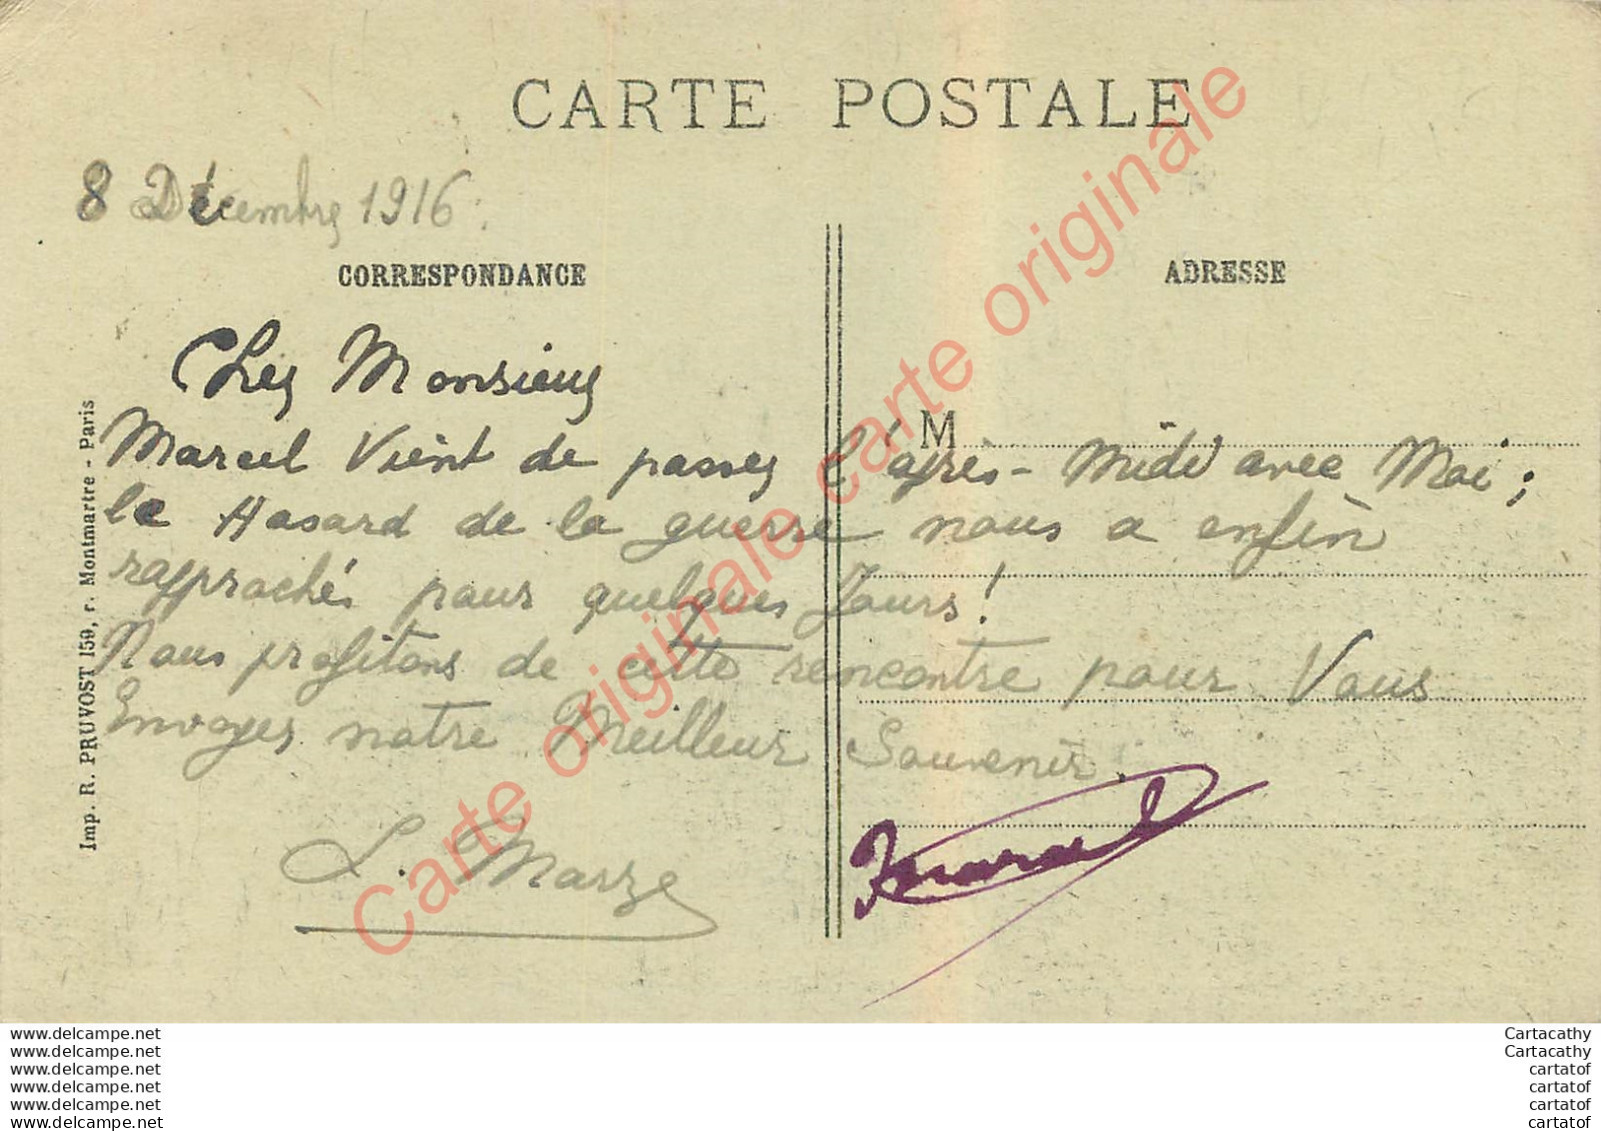 80.  FOUCAUCOURT . Offensive Franco-Anglaise . Les Ruines . GUERRE 1914 ... - Other & Unclassified